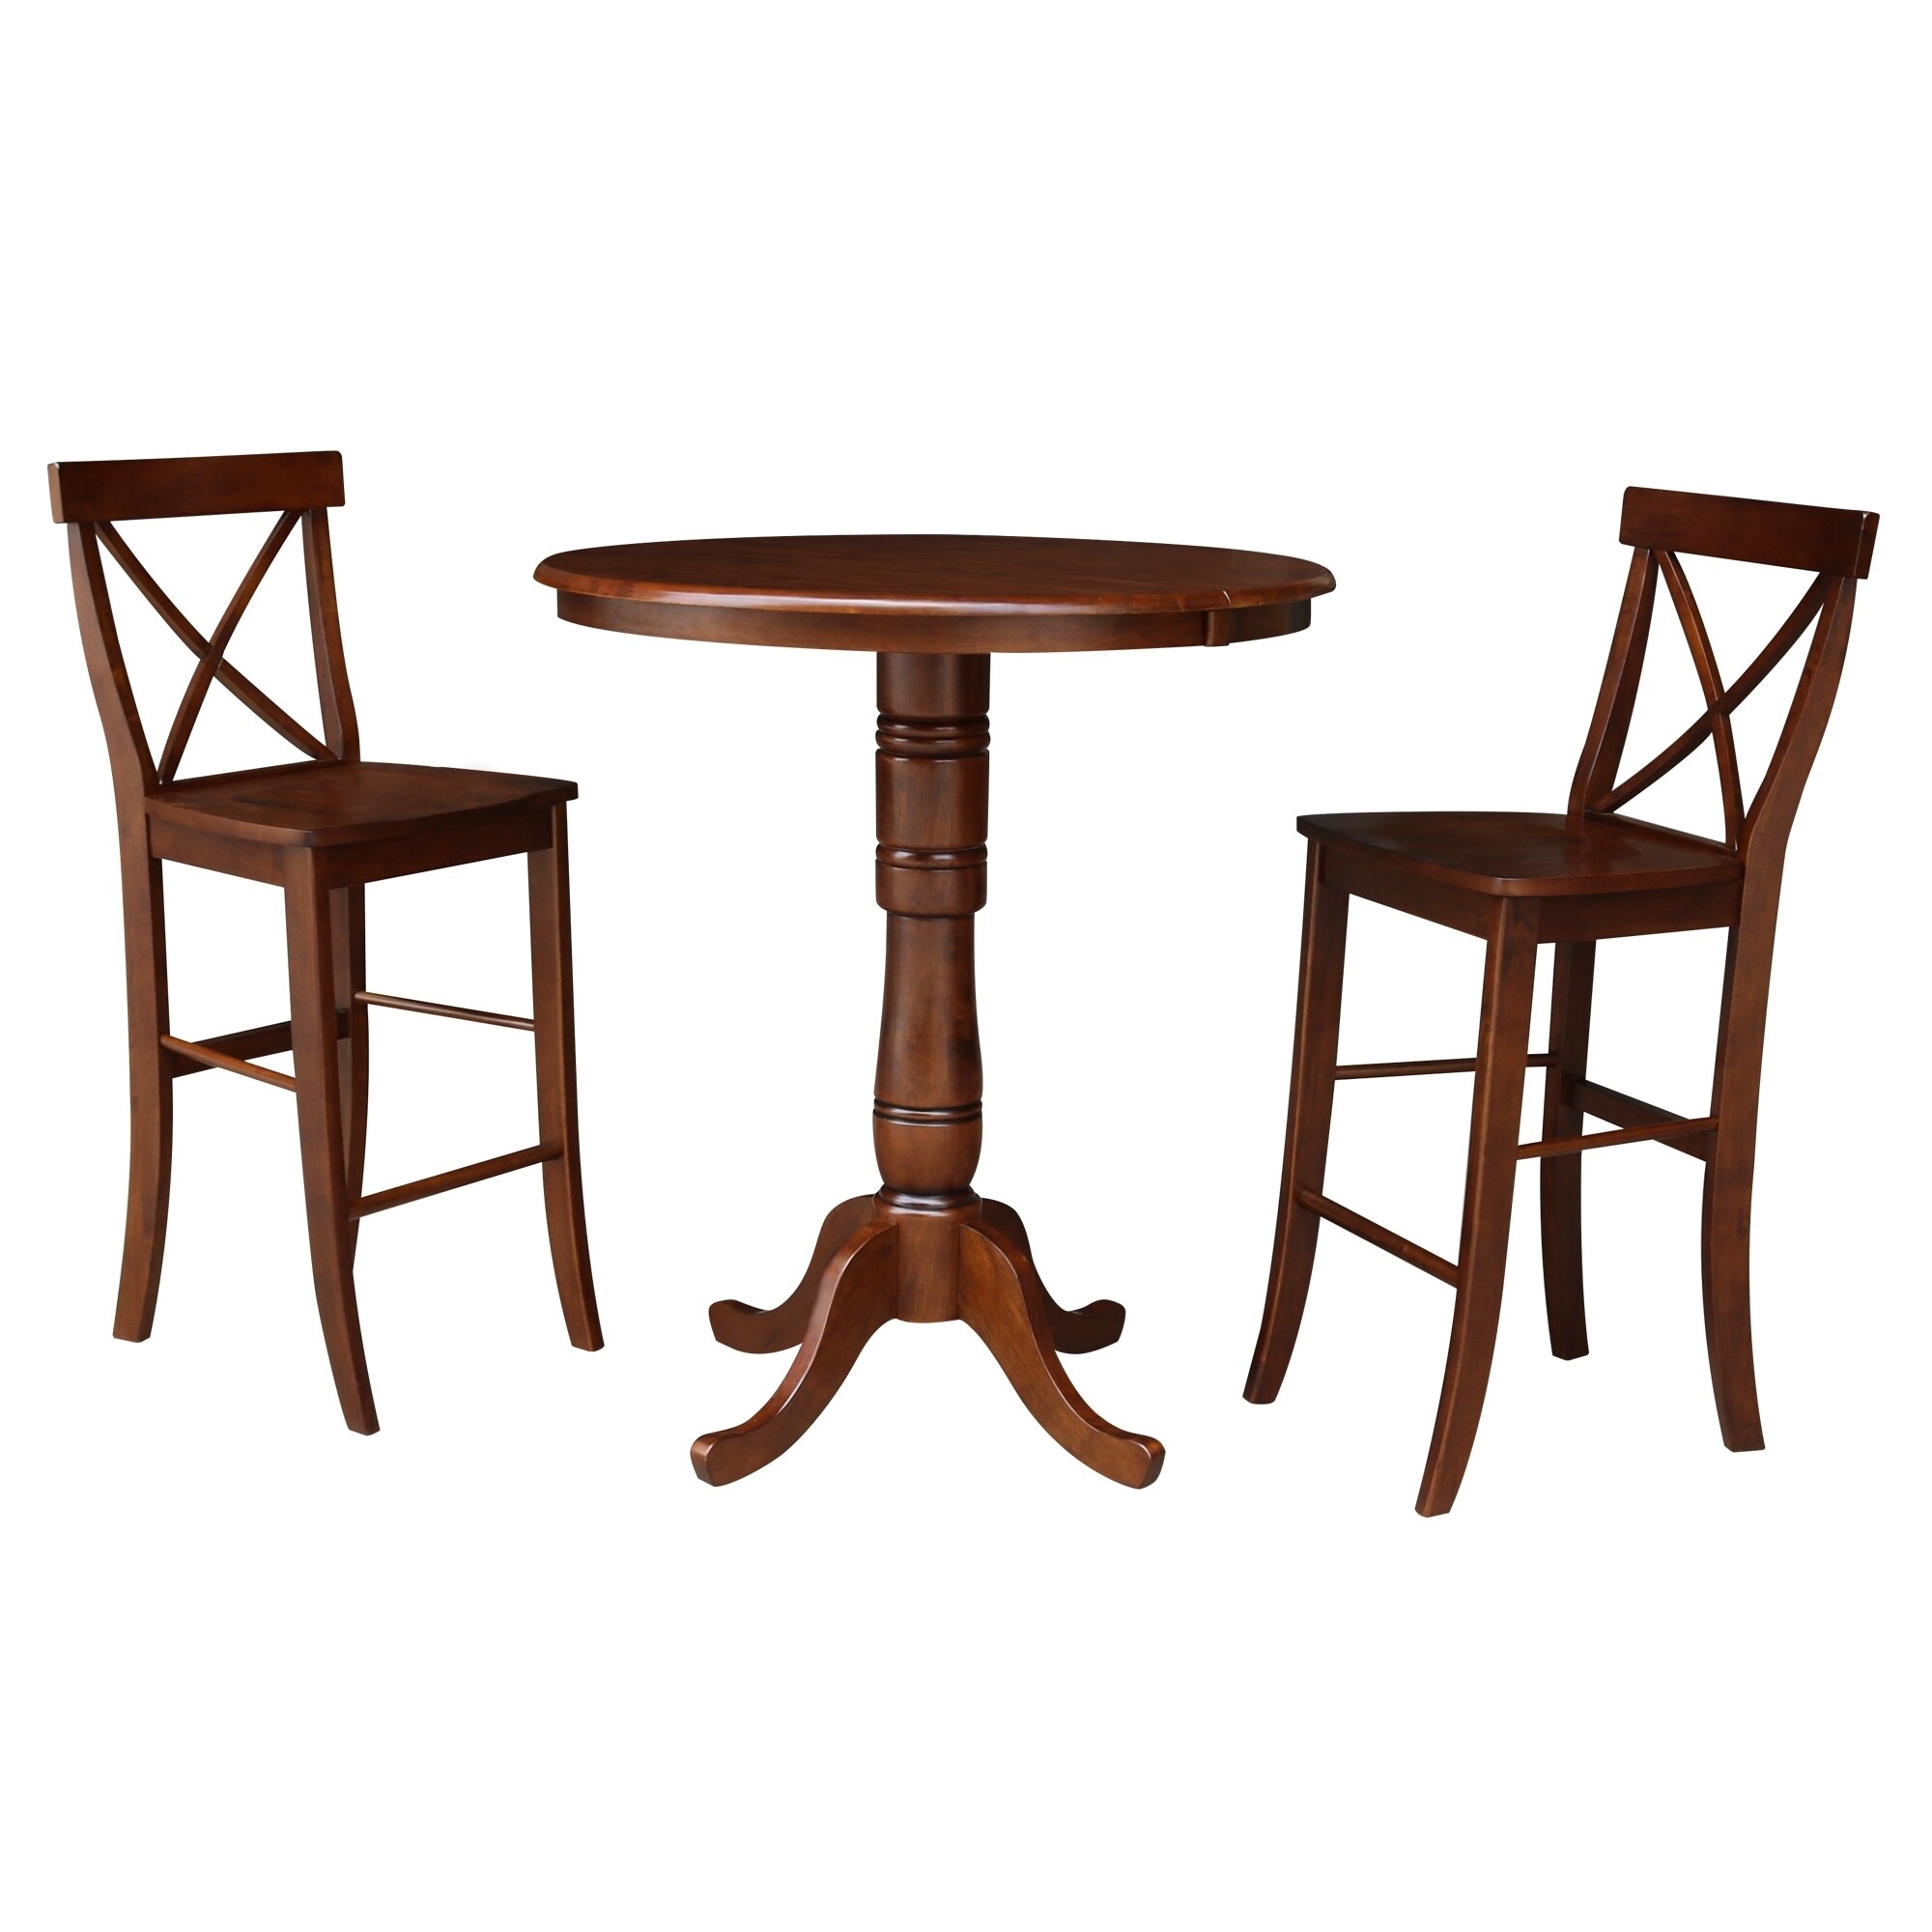 36" Round Extension Dining table with 2 X-Back Barheight Stools - Set of 3 Pieces - image 3 of 9